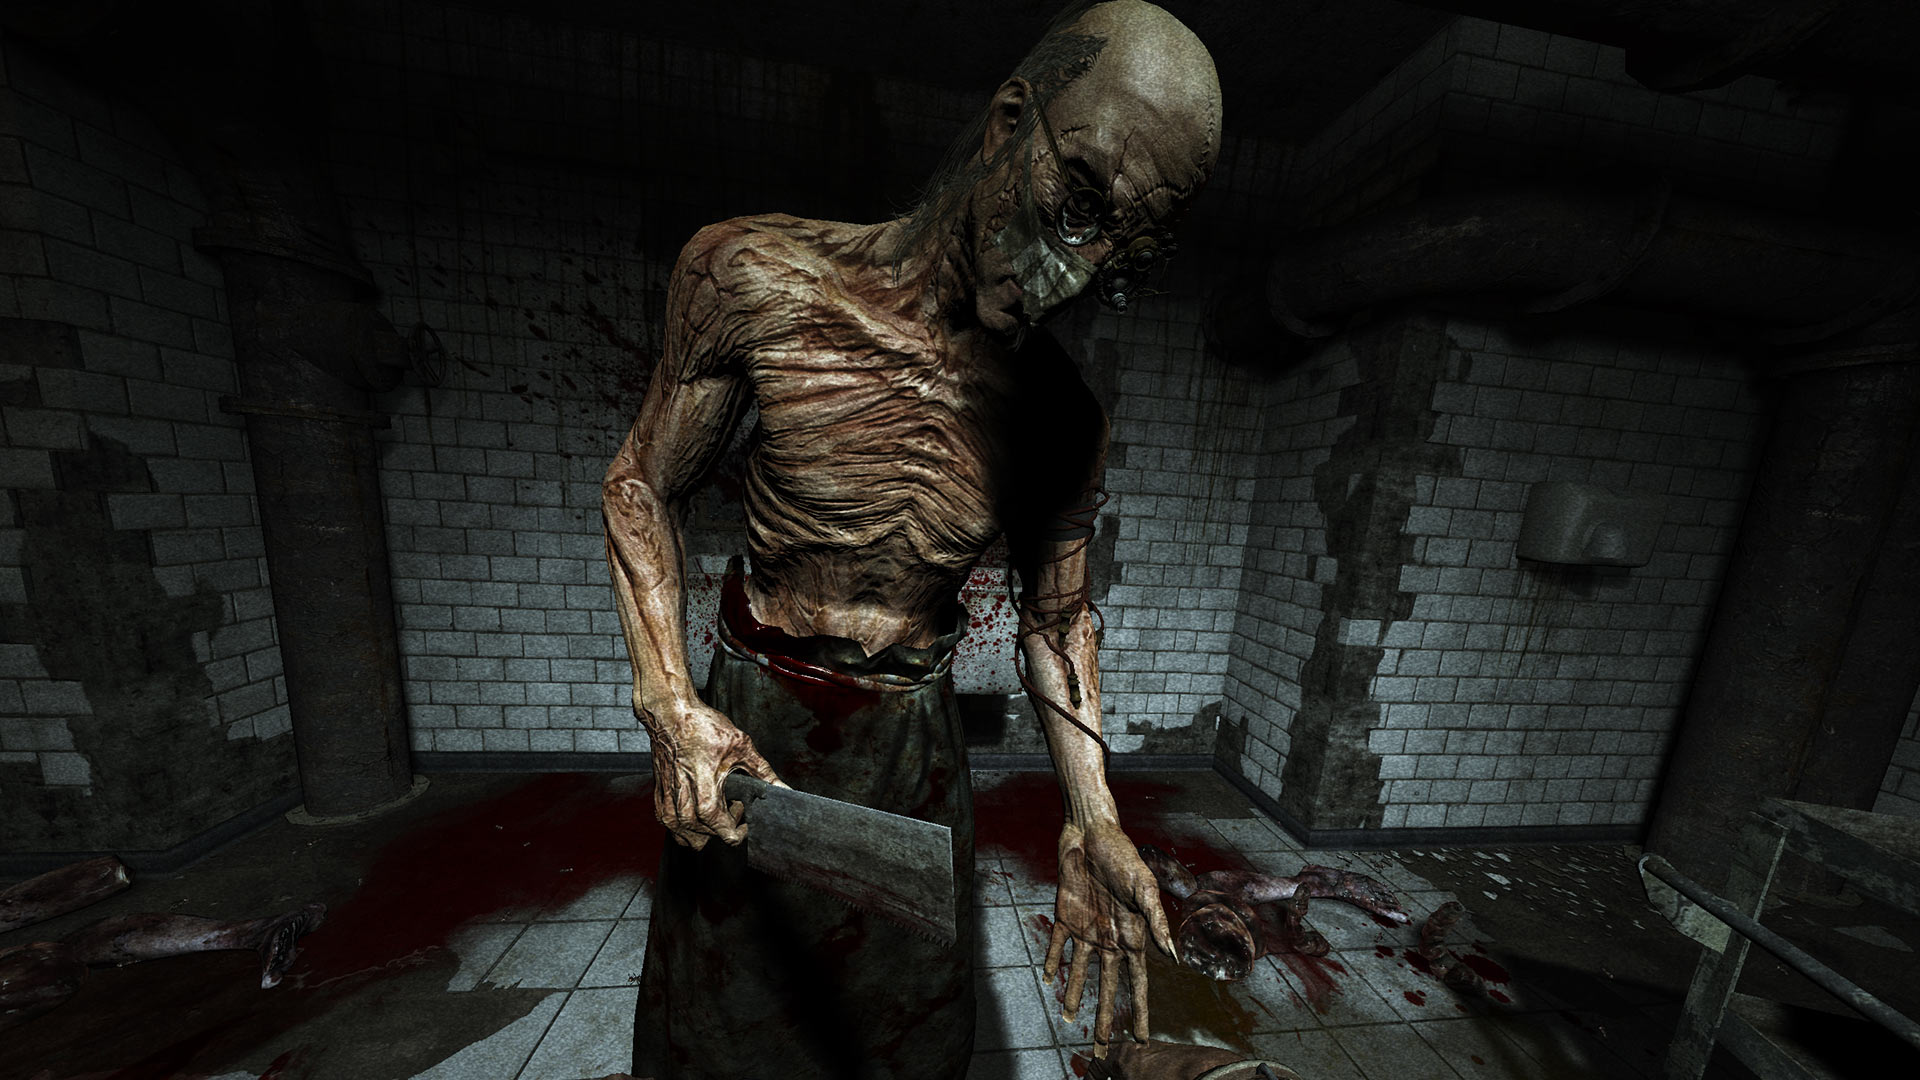 Outlast Trinity for PlayStation 4 - Summary, Story, Characters, Maps